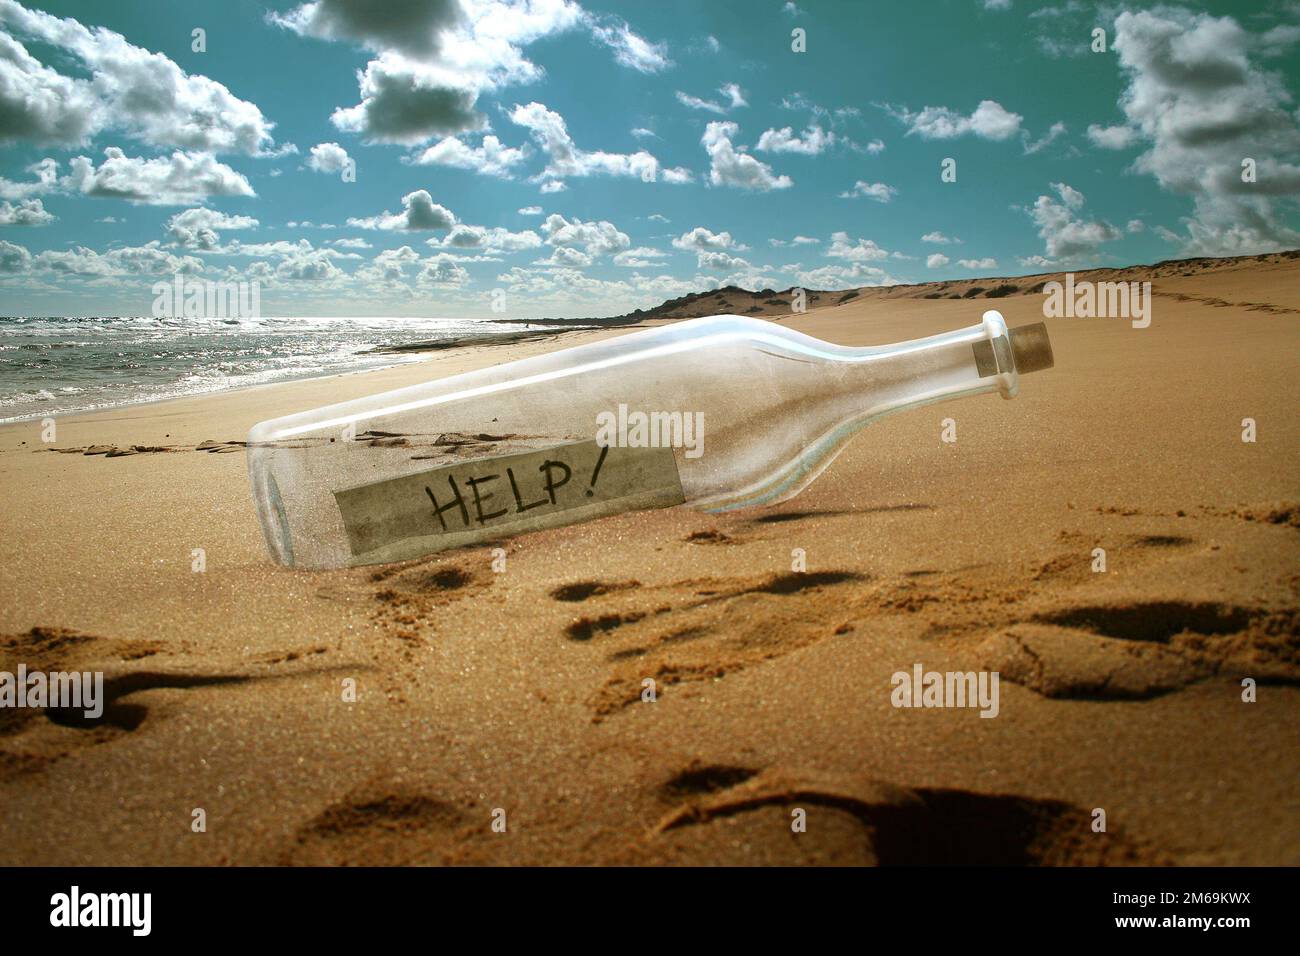 Help message in a bottle Stock Photo